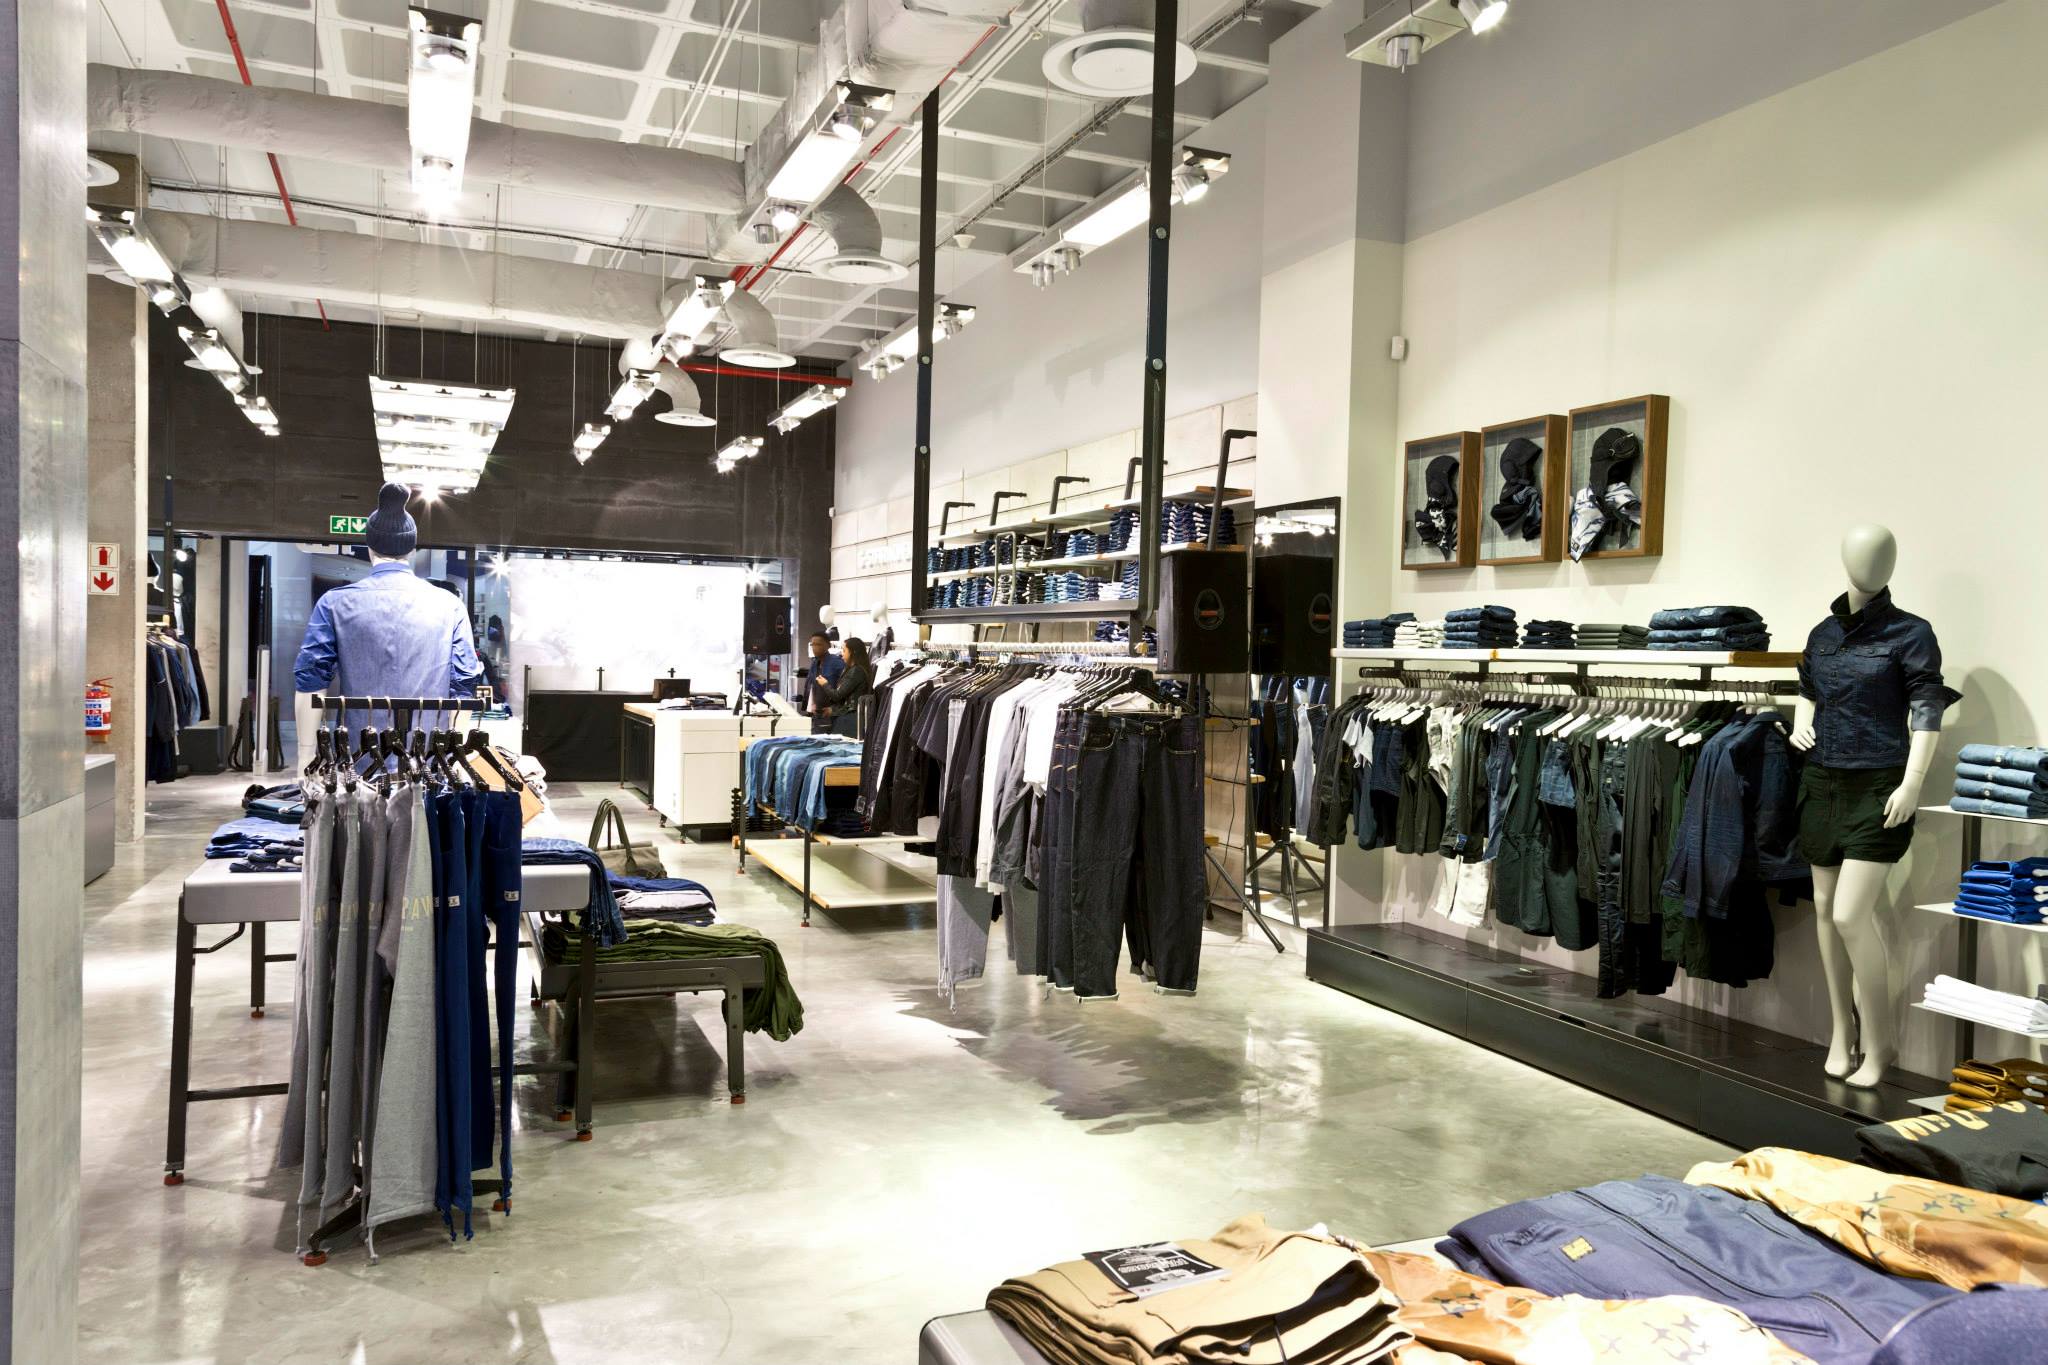 gstar raw outlet